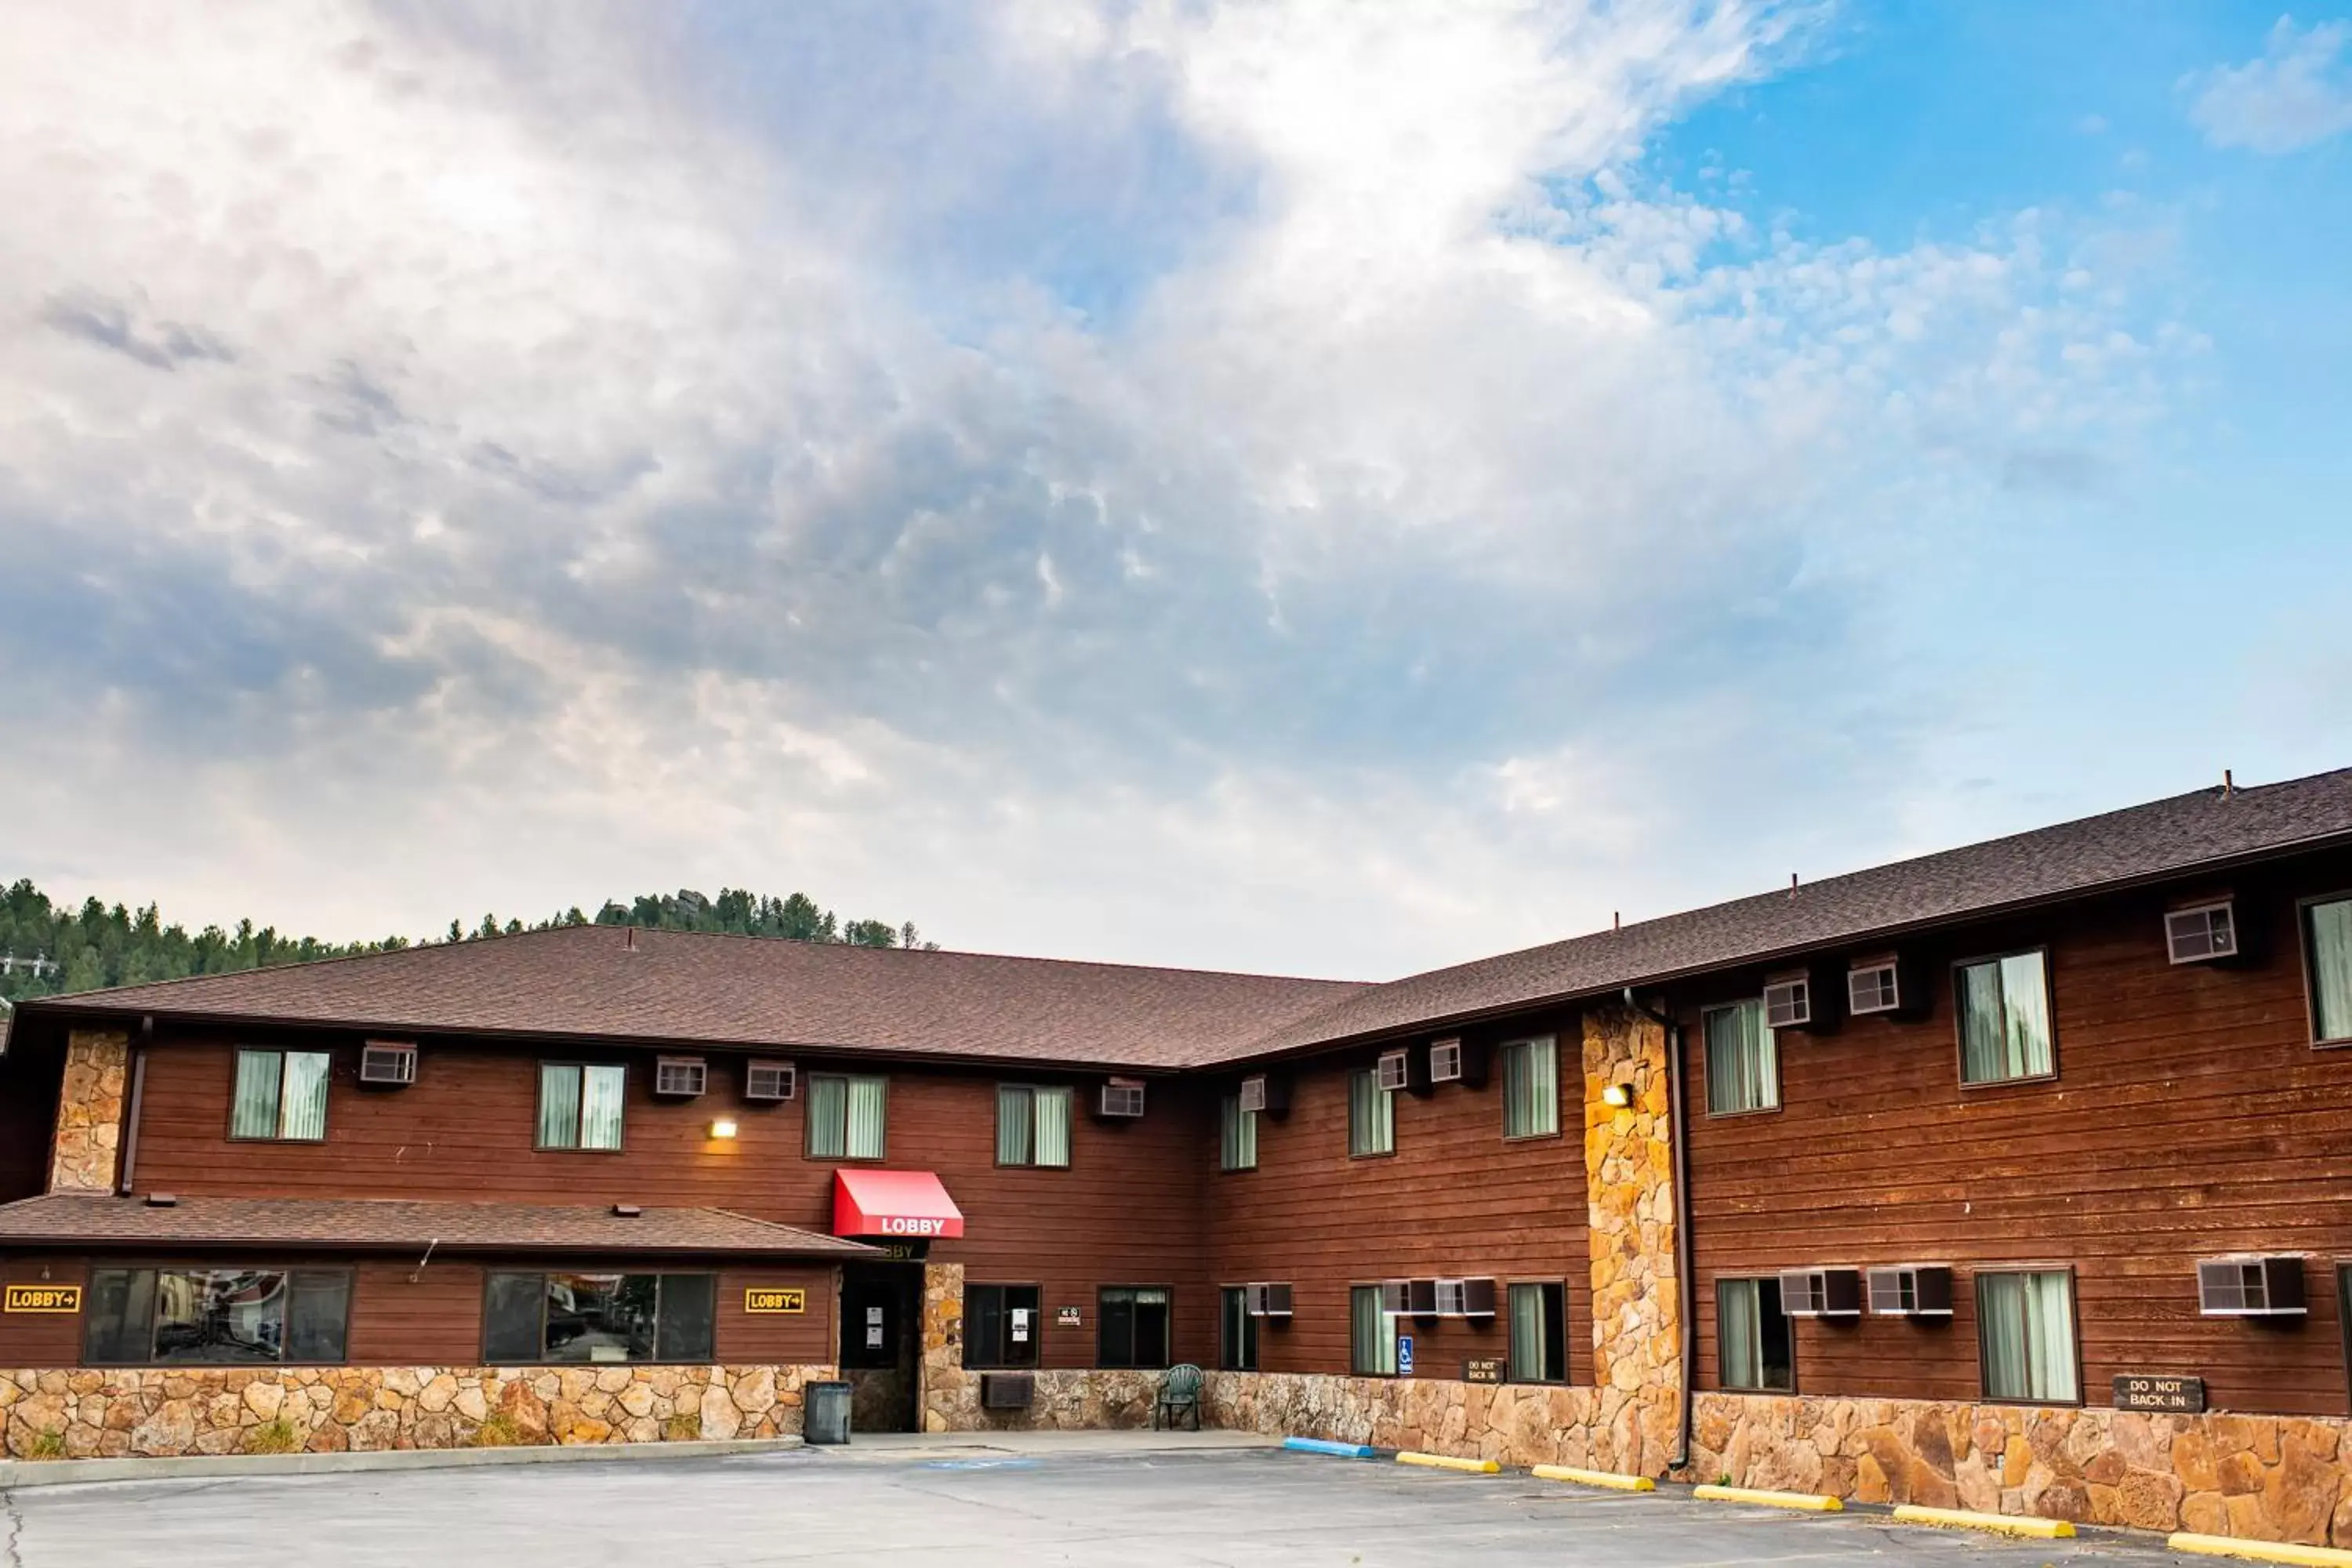 Property Building in Econo Lodge, Downtown Custer Near Custer State Park and Mt Rushmore